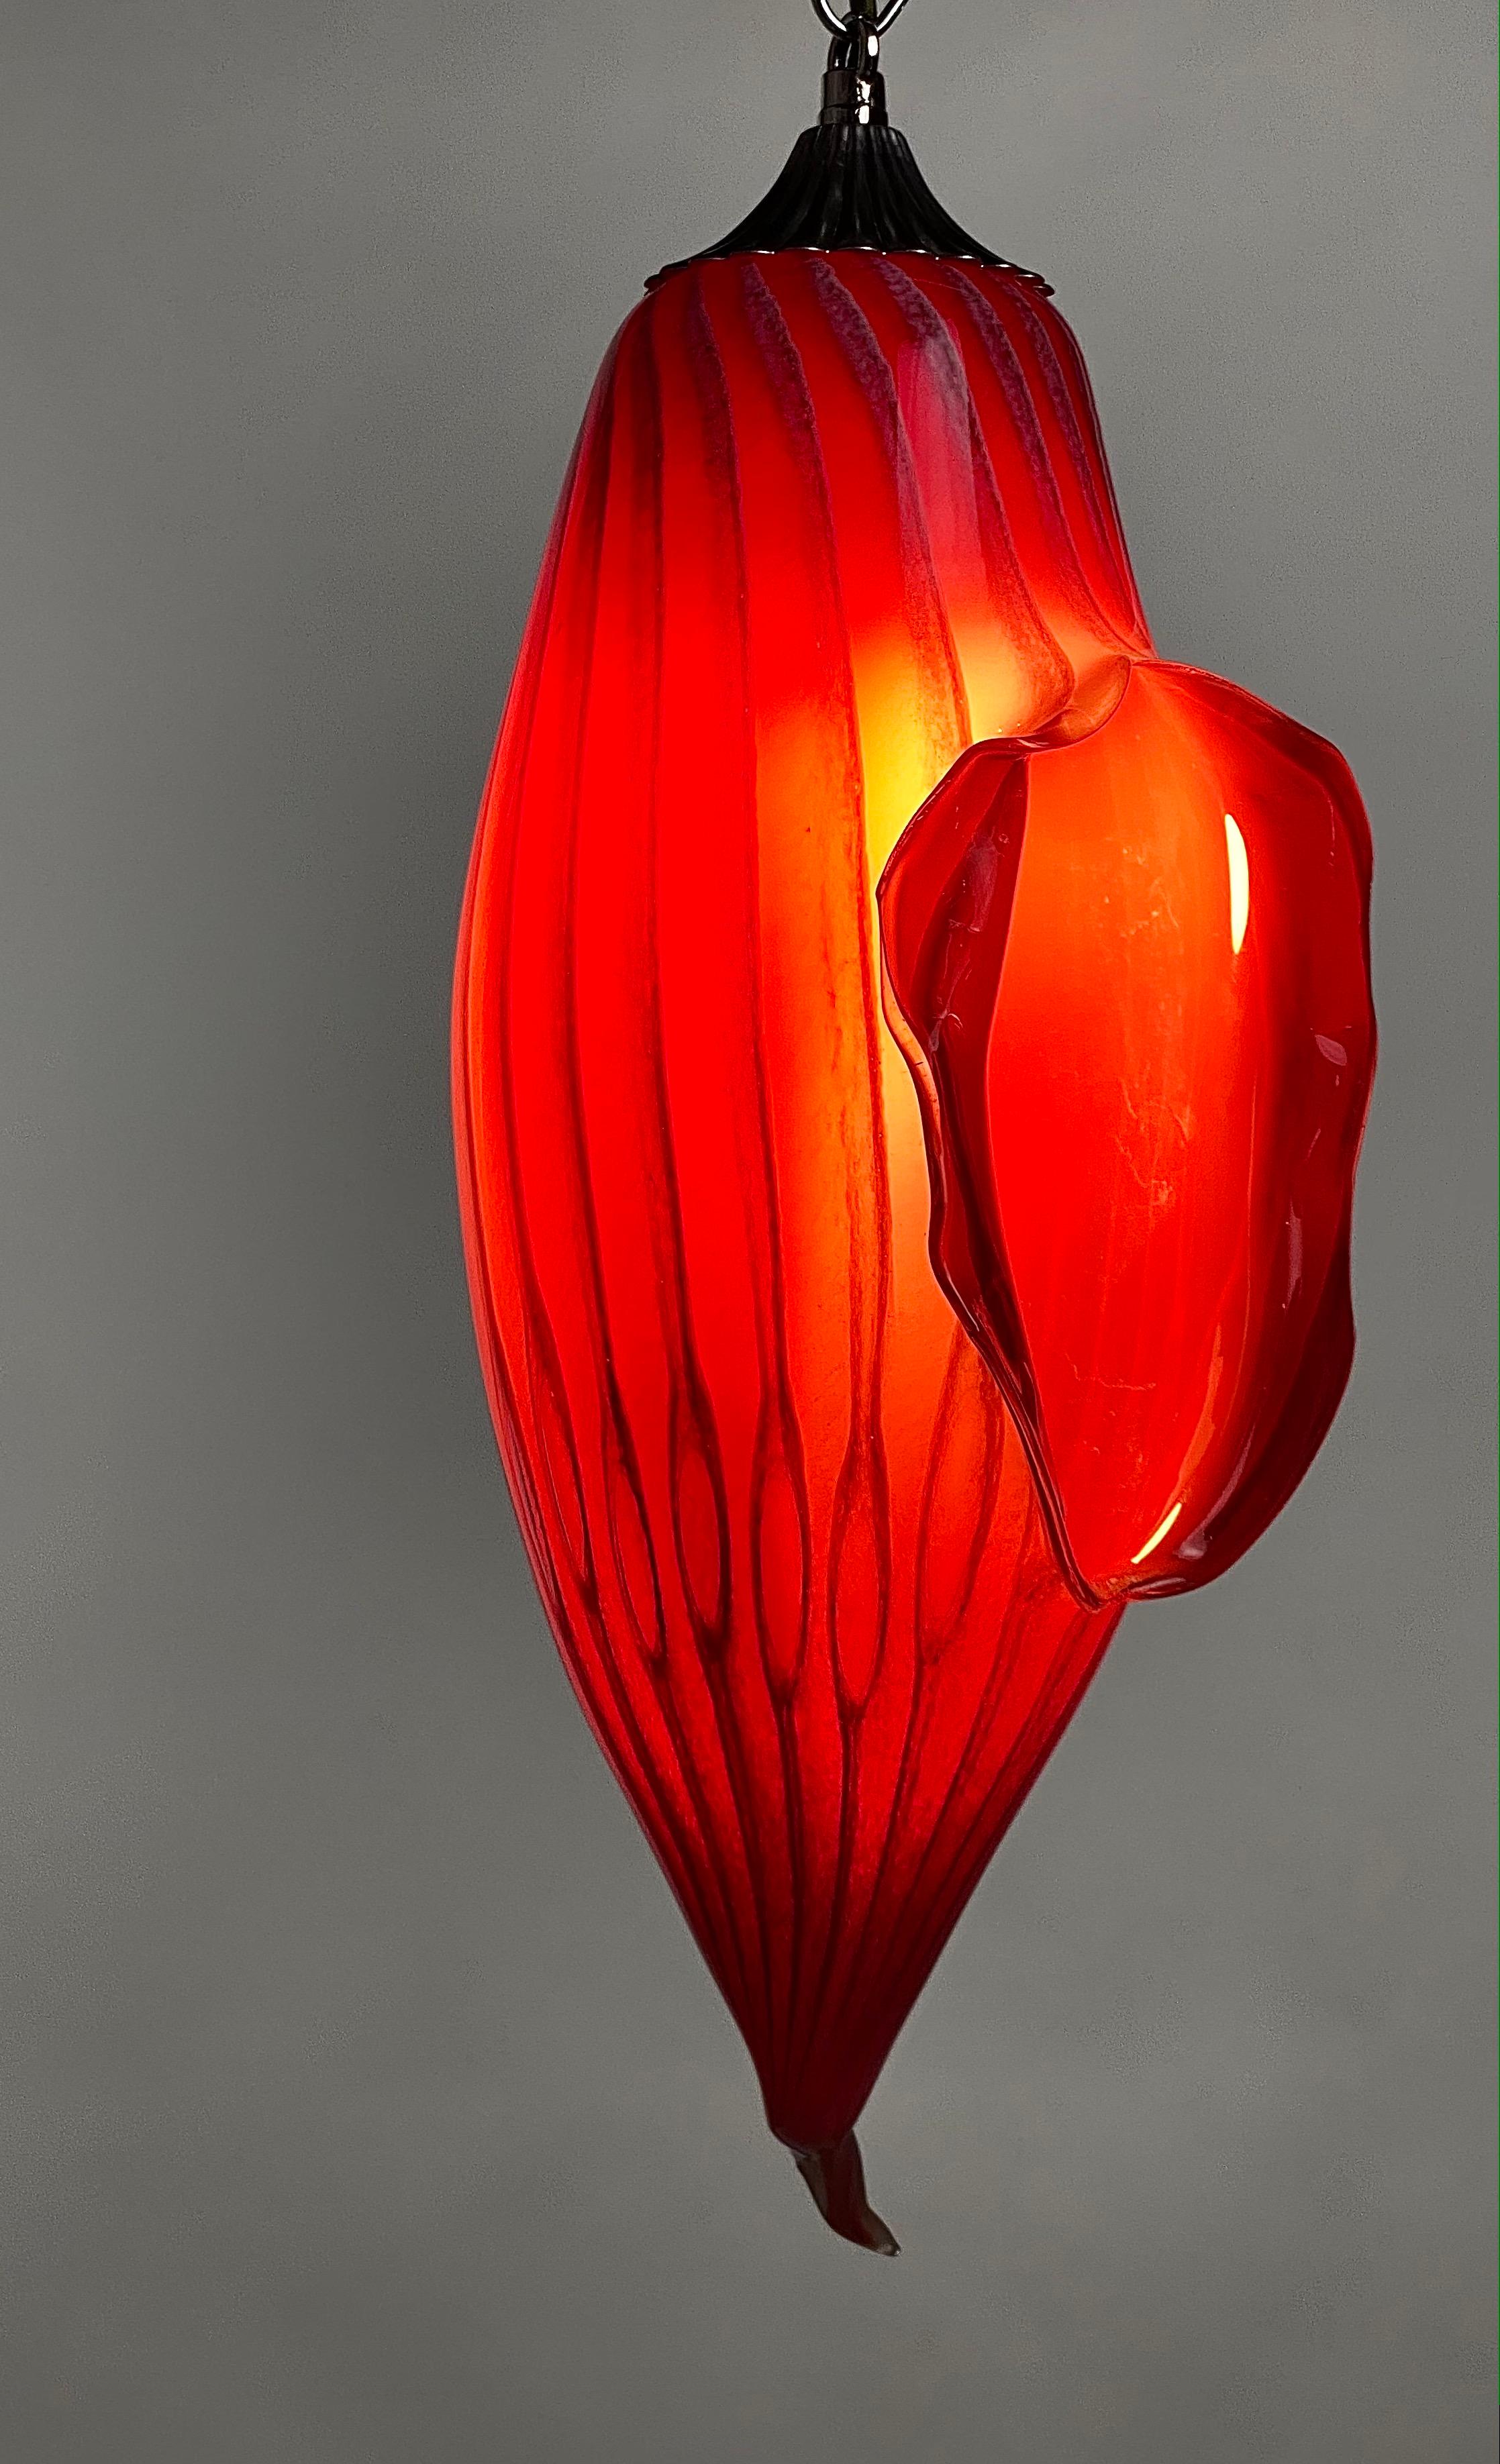 Red Blown Glass Table or Pendent Light, 21st Century by Mattia Biagi For Sale 1